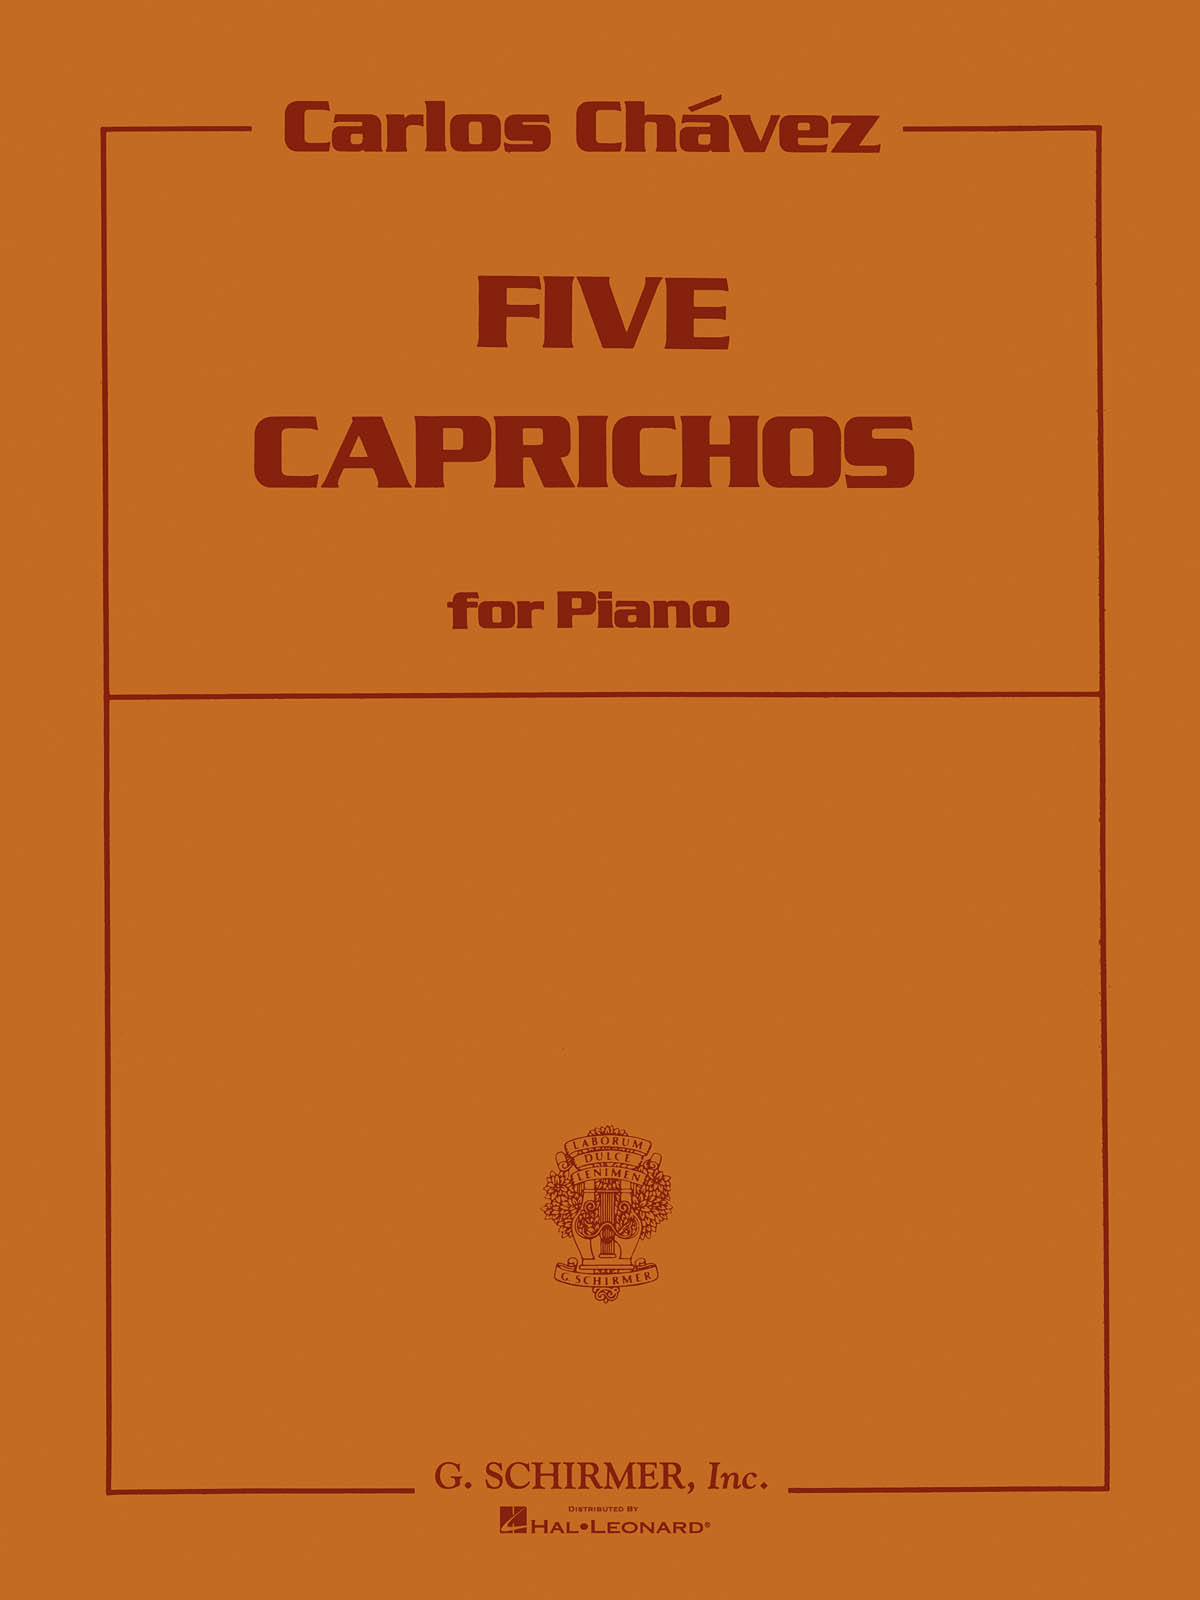 Carlos Chavez: Five Capriches For Piano